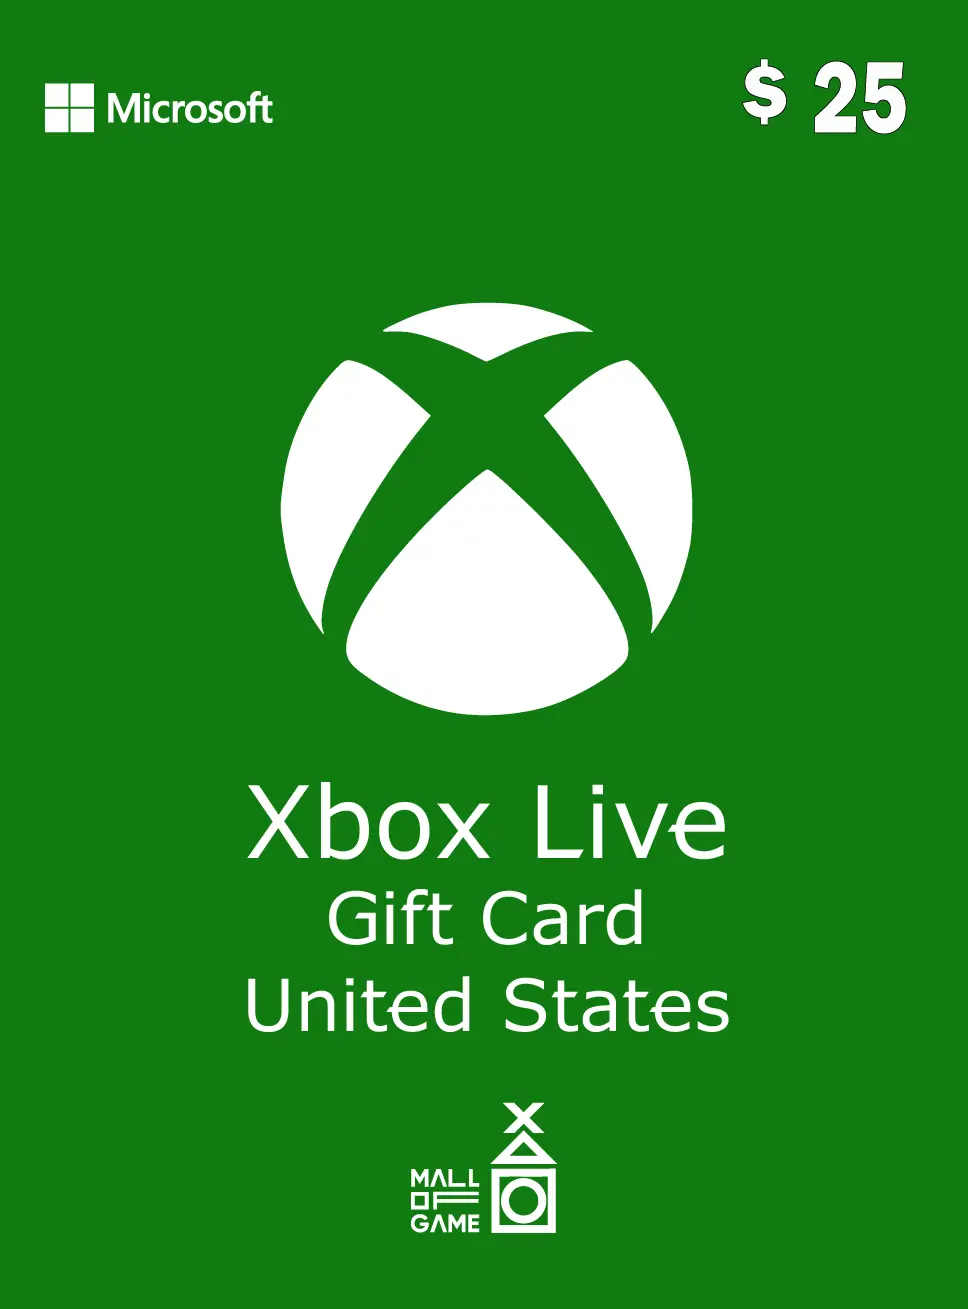 Xbox Live Gift Card - US$ 25